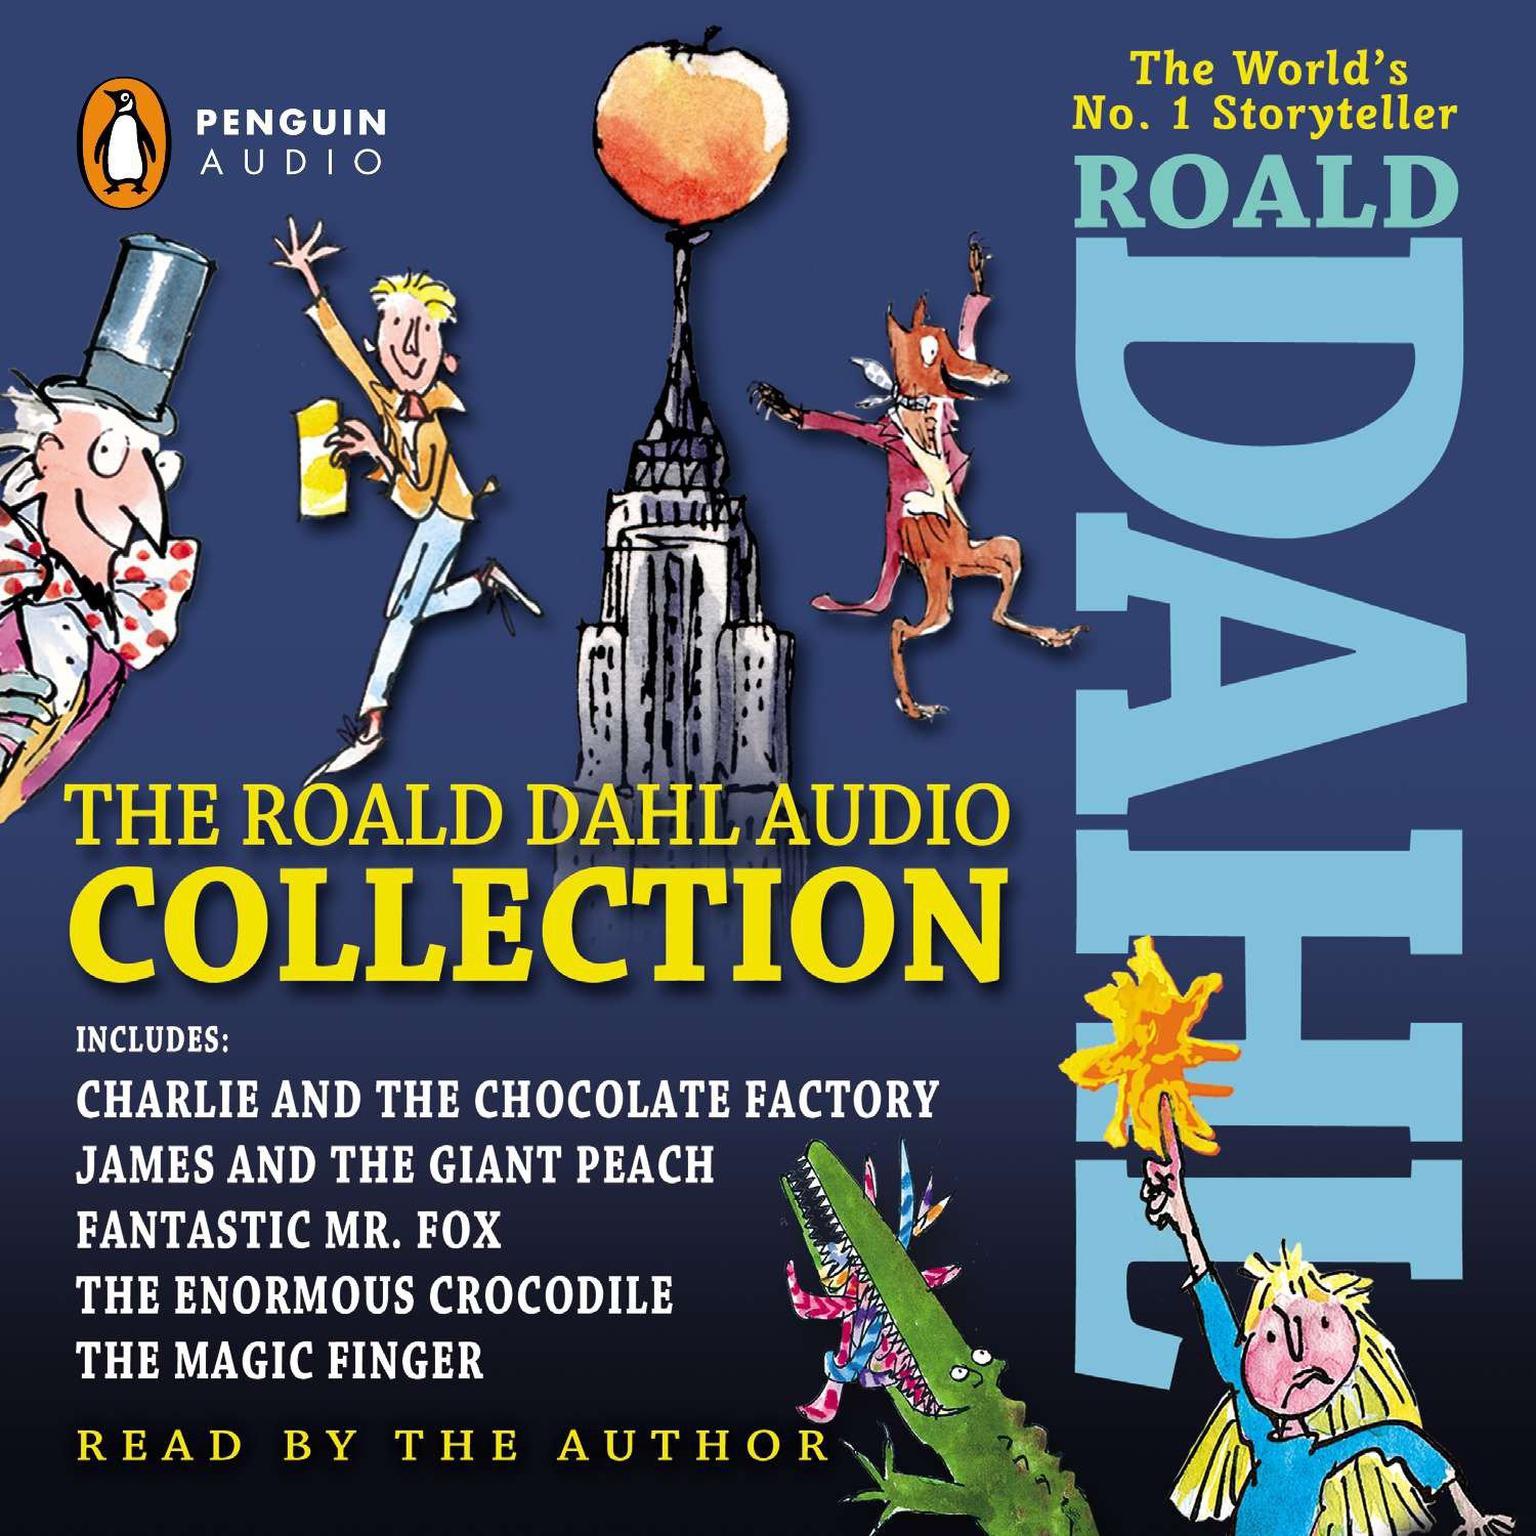 The Roald Dahl Audio Collection (Abridged): Includes Charlie and the Chocolate Factory, James and the Giant Peach, Fantastic Mr. Fox, The Enormous Crocodile & The Magic Finger Audiobook, by Roald Dahl